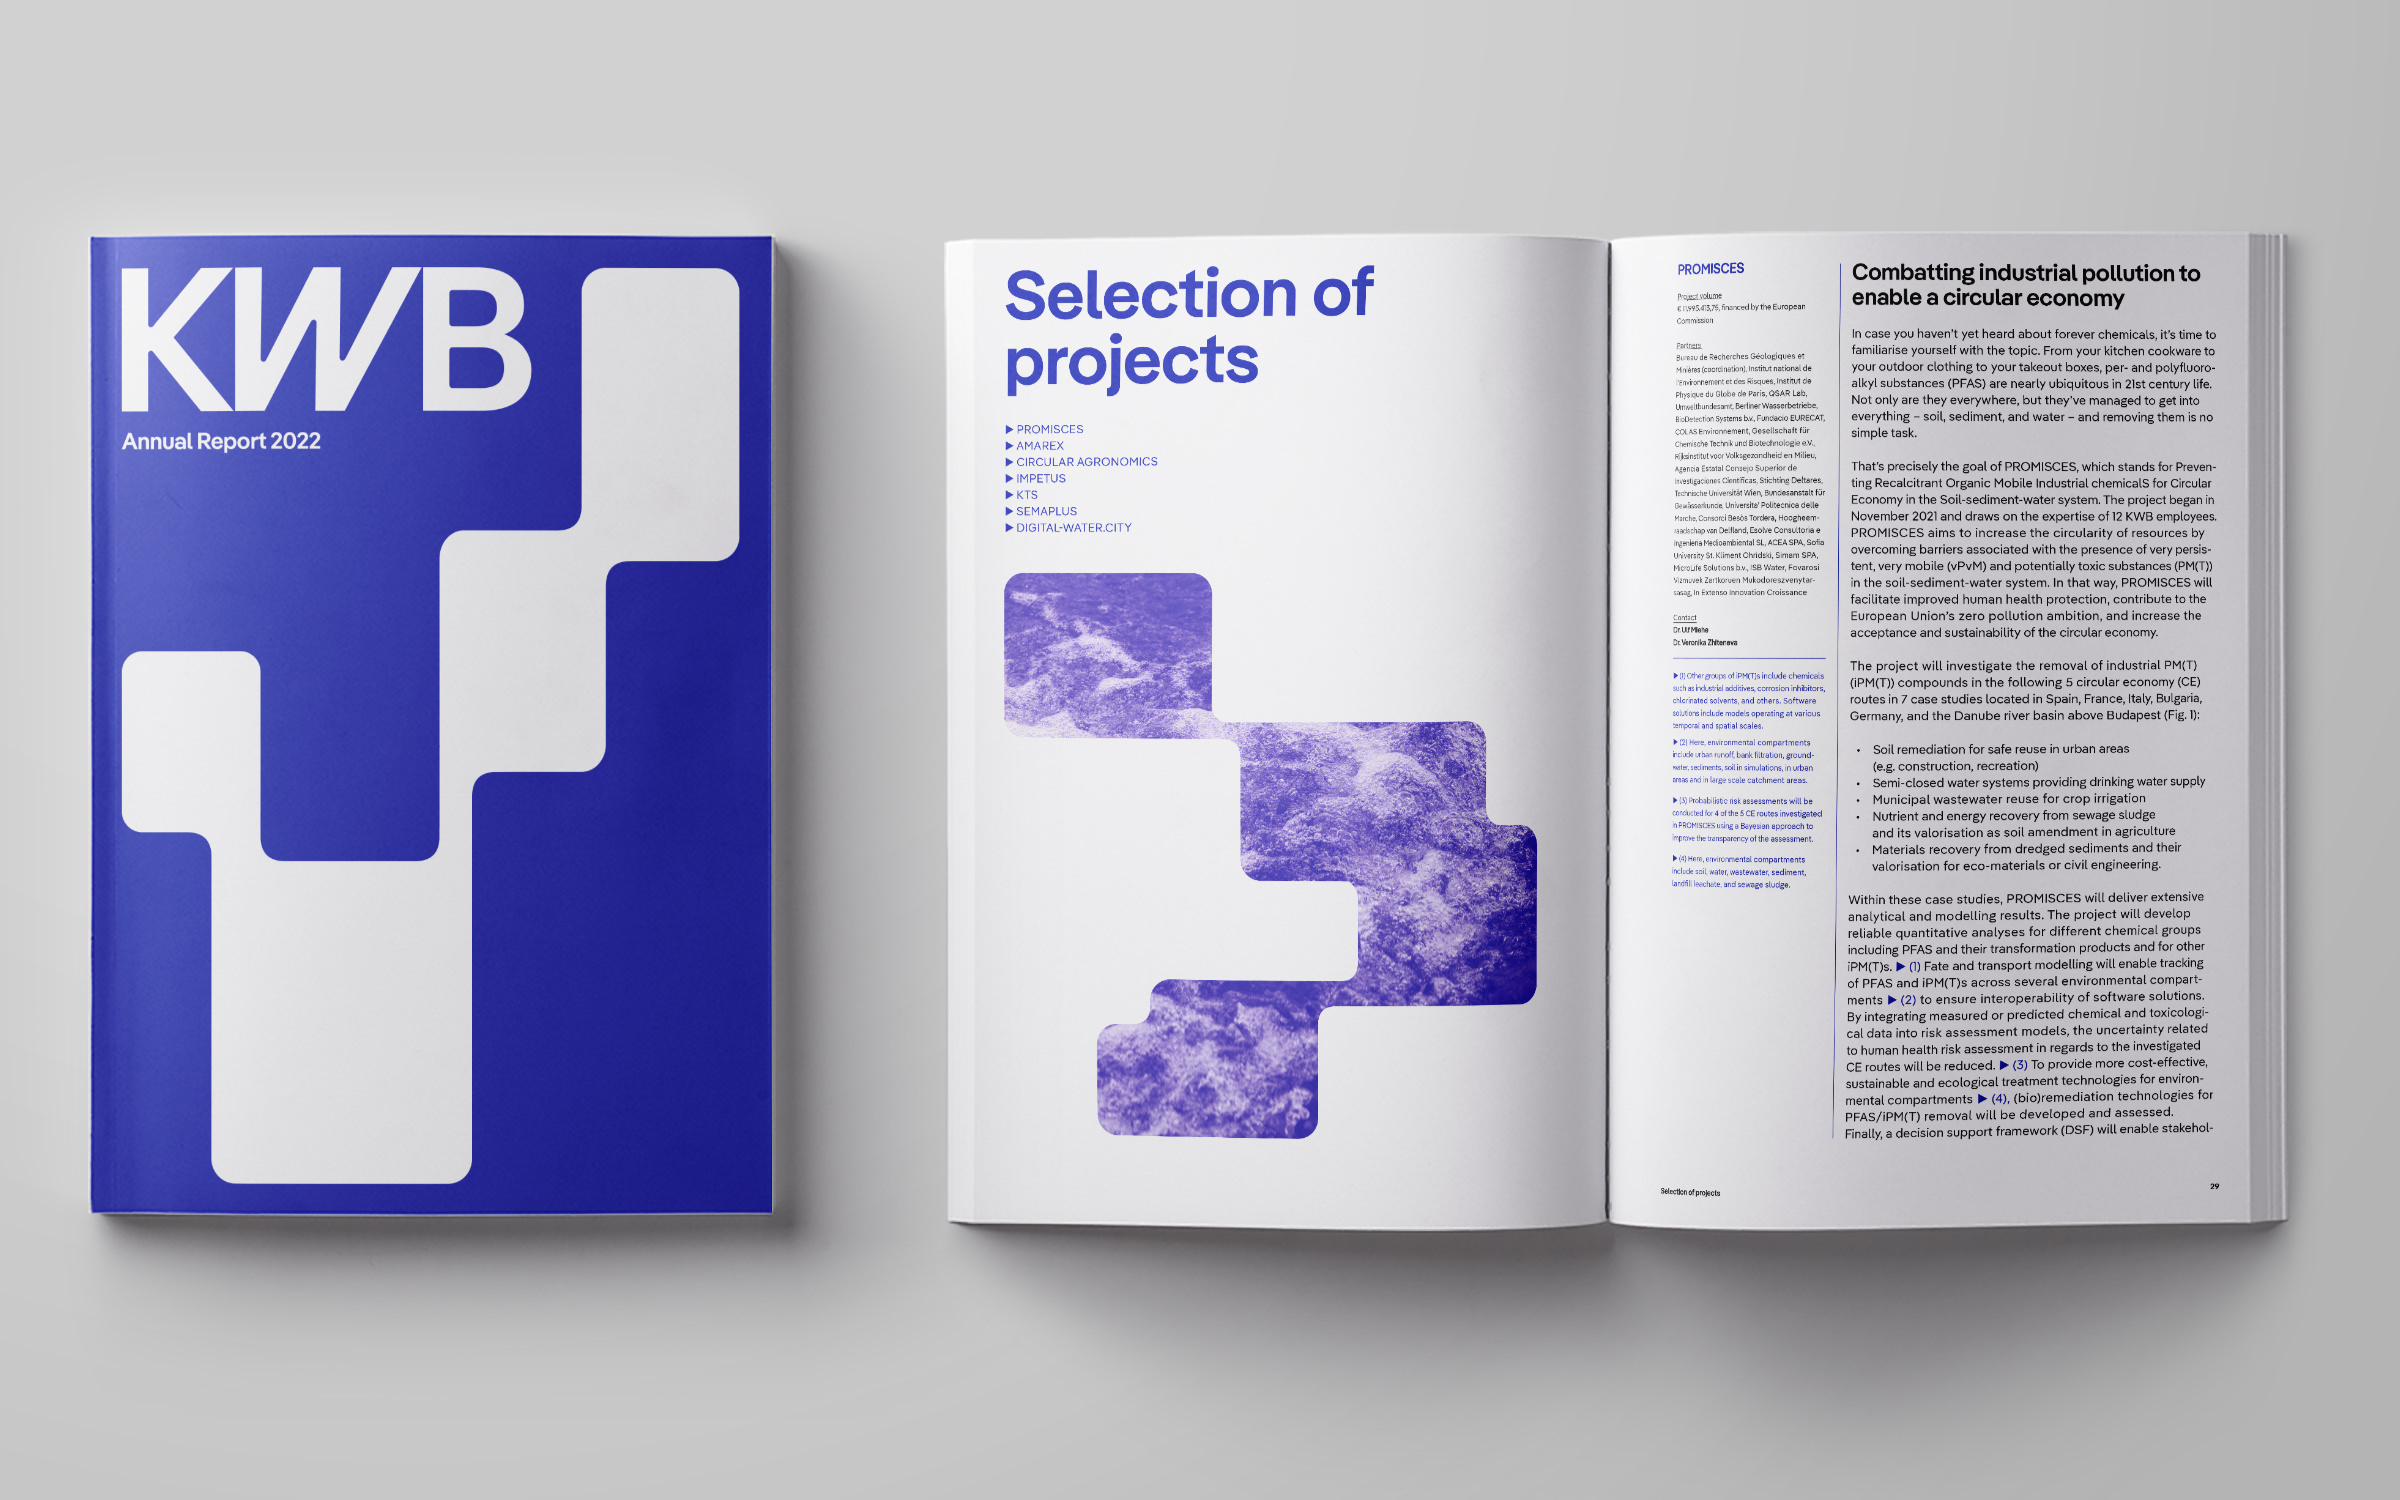 KWB’s Annual Report 2022 in the brand new design: Headline and display font is Pangea, with an exclusively-designed W and w, the text font is Pangea Text